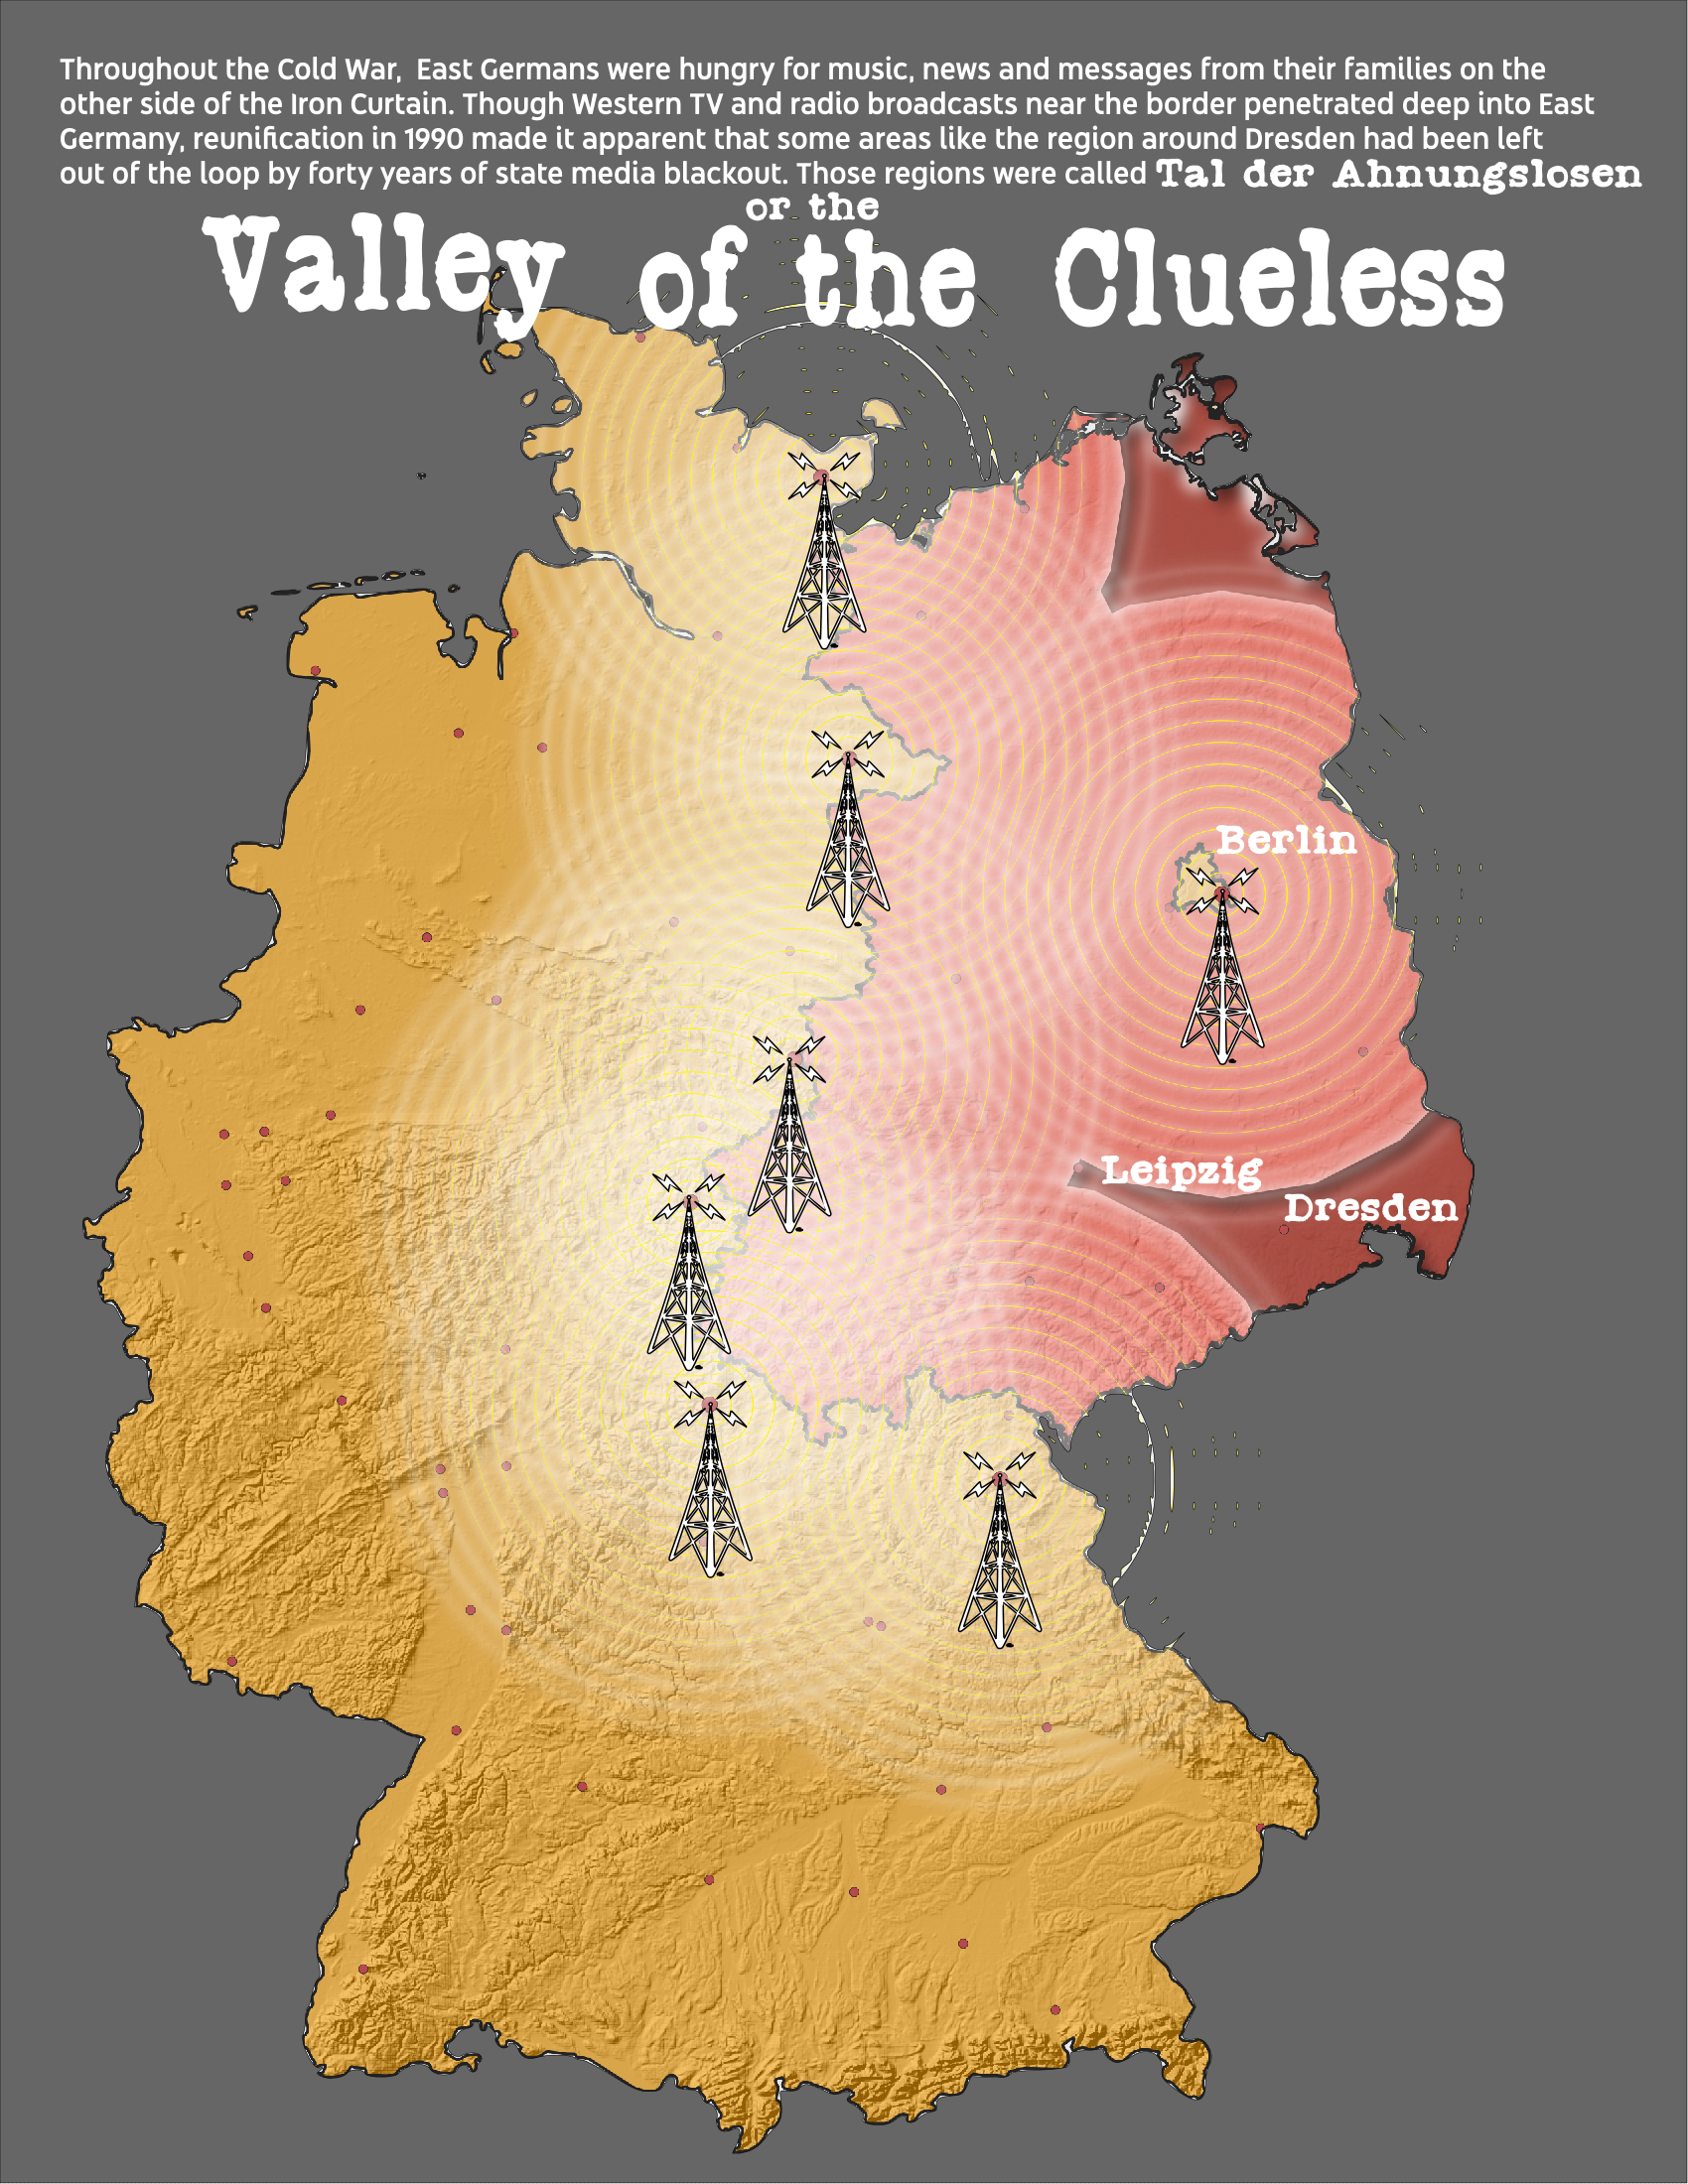 The Valley of the Clueless